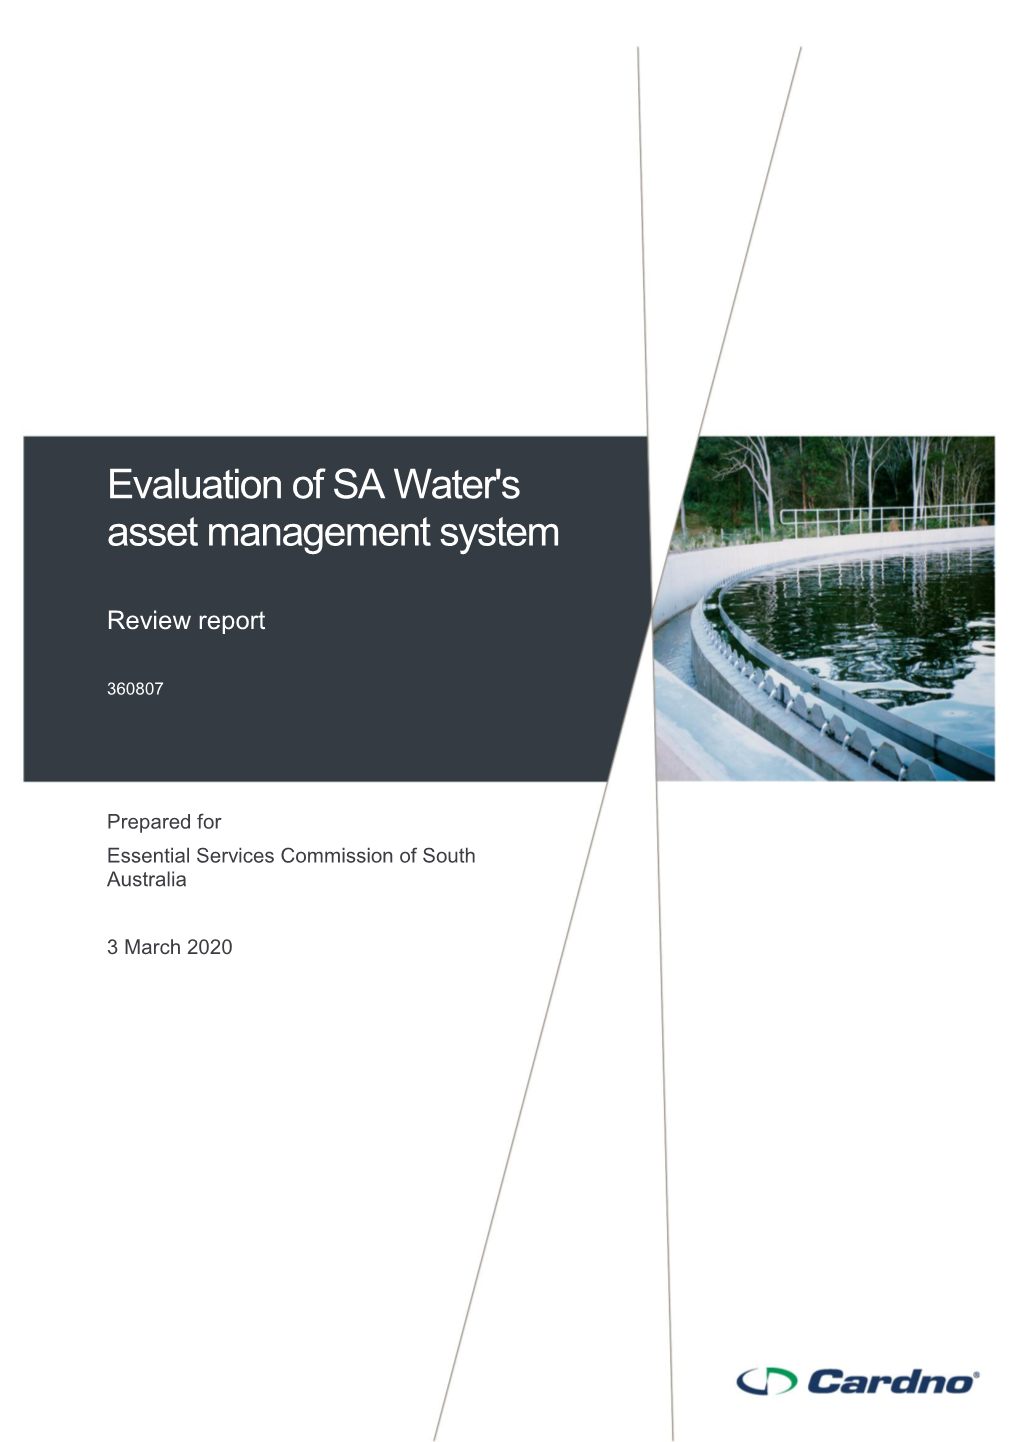 Evaluation of SA Water's Asset Management System Review Report